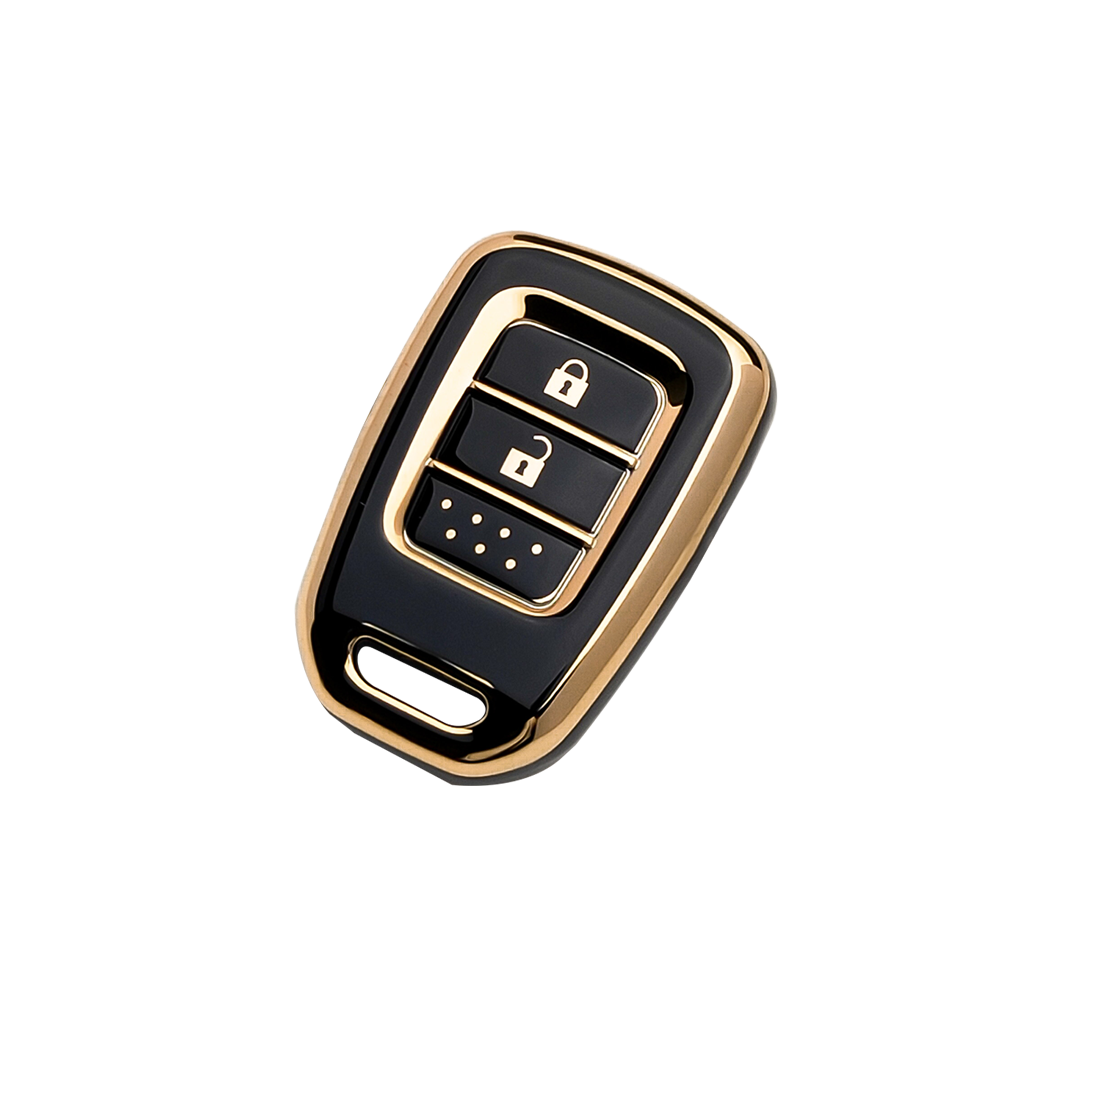 Acto TPU Gold Series Car Key Cover With TPU Gold Key Chain For Honda Brio